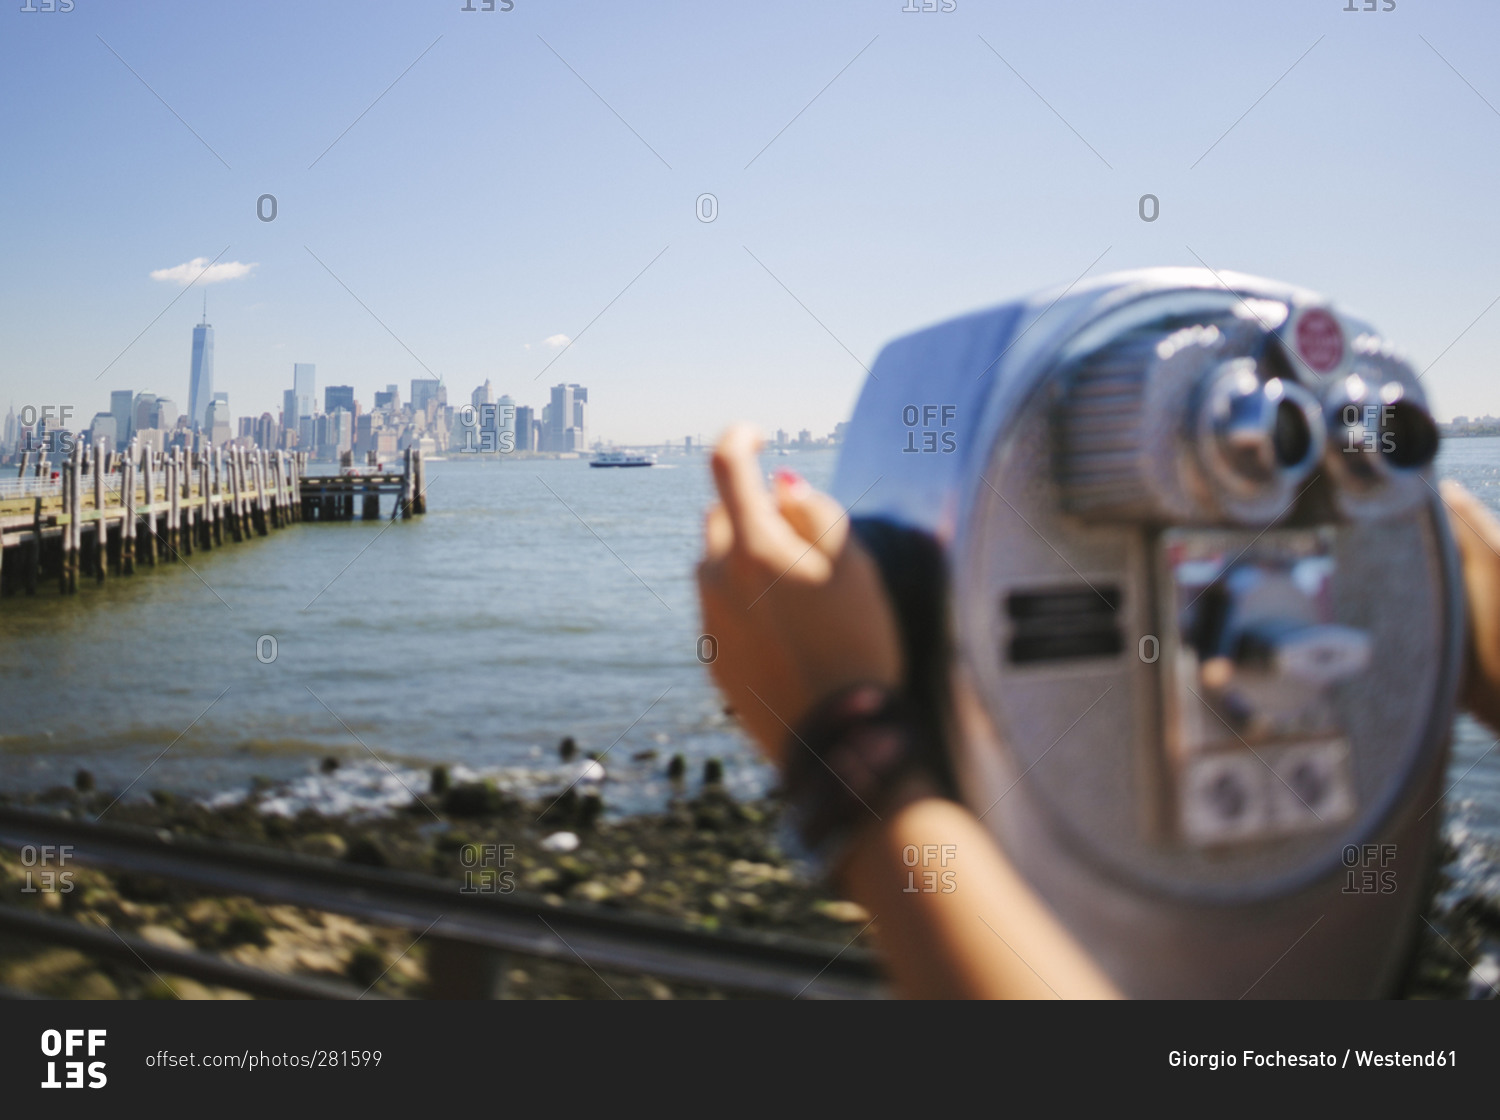 View to the skyline with person using coin operated binoculars in the foreground, New York City